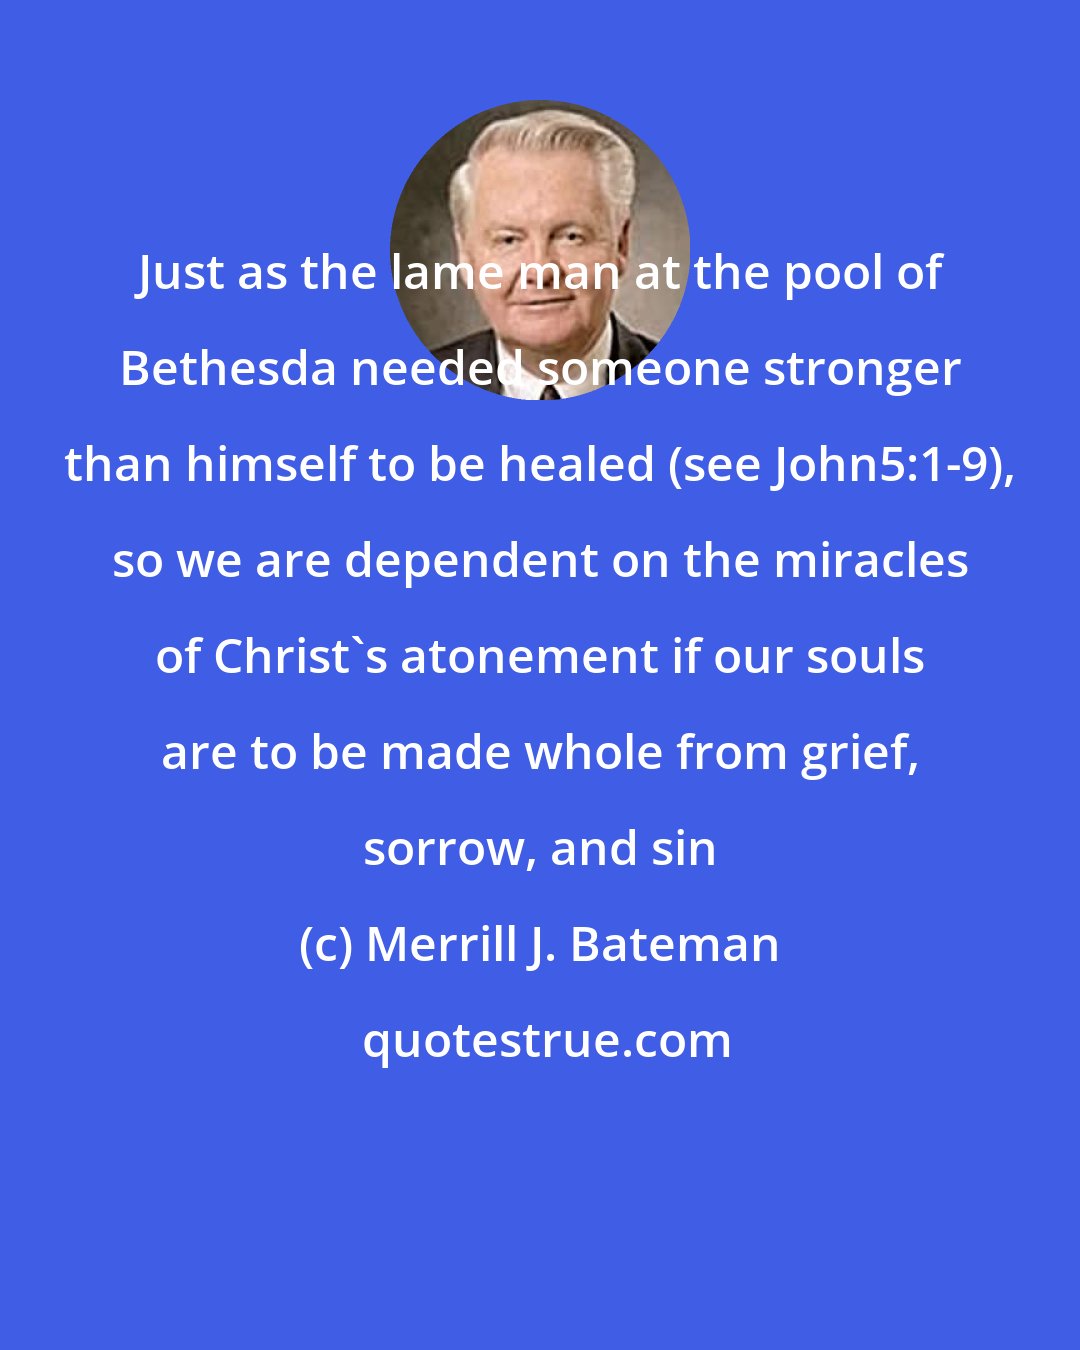 Merrill J. Bateman: Just as the lame man at the pool of Bethesda needed someone stronger than himself to be healed (see John5:1-9), so we are dependent on the miracles of Christ's atonement if our souls are to be made whole from grief, sorrow, and sin